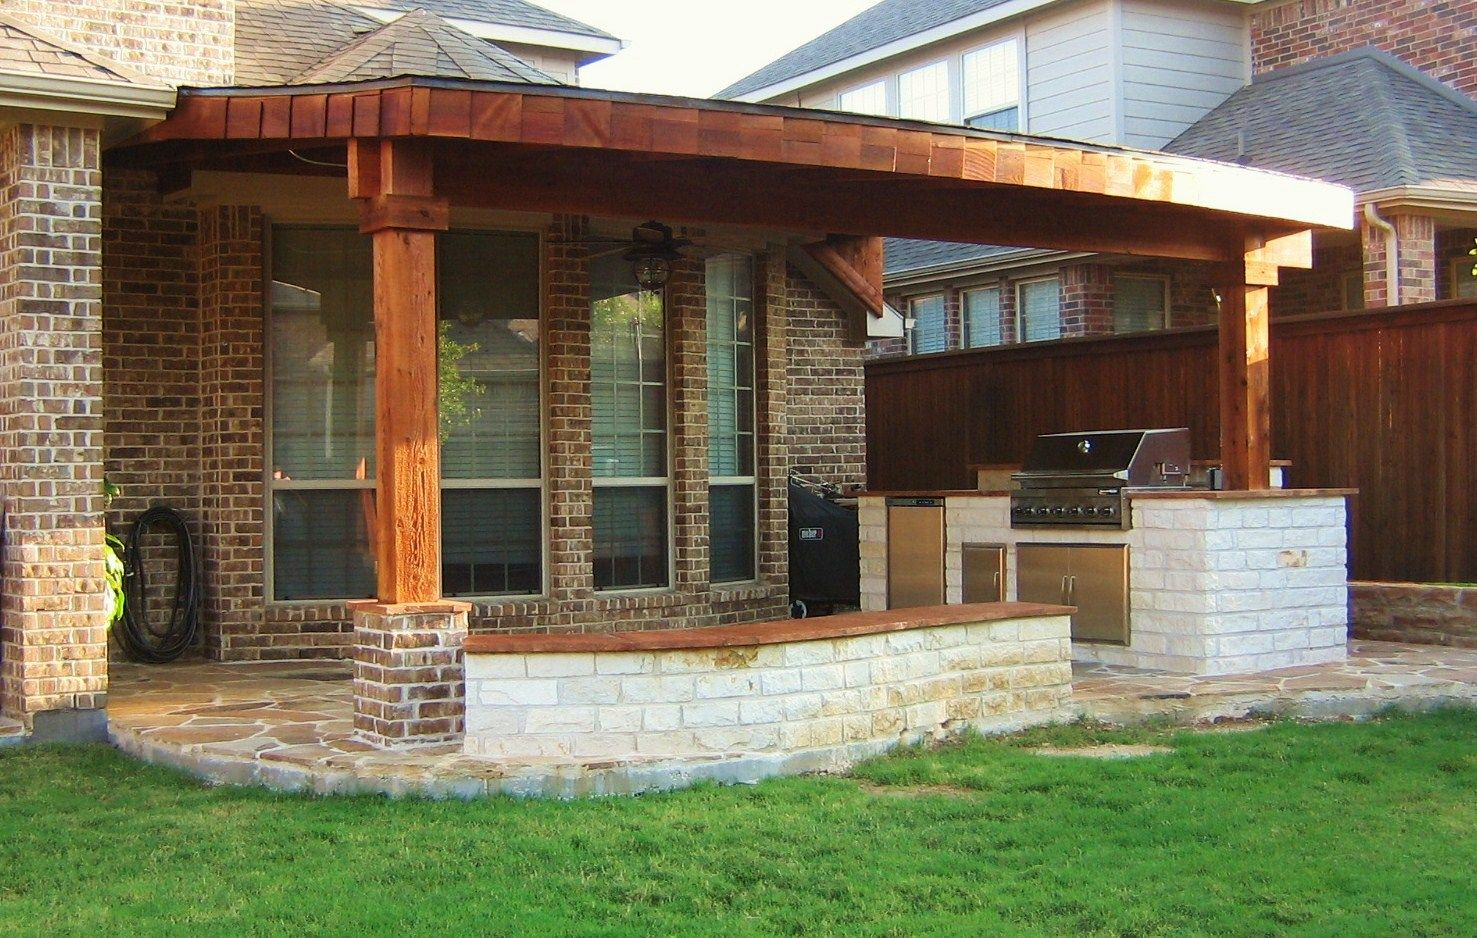 Patio Designs 14x24 Cedar Patio Cover Complete With 2 Brick intended for size 1477 X 938